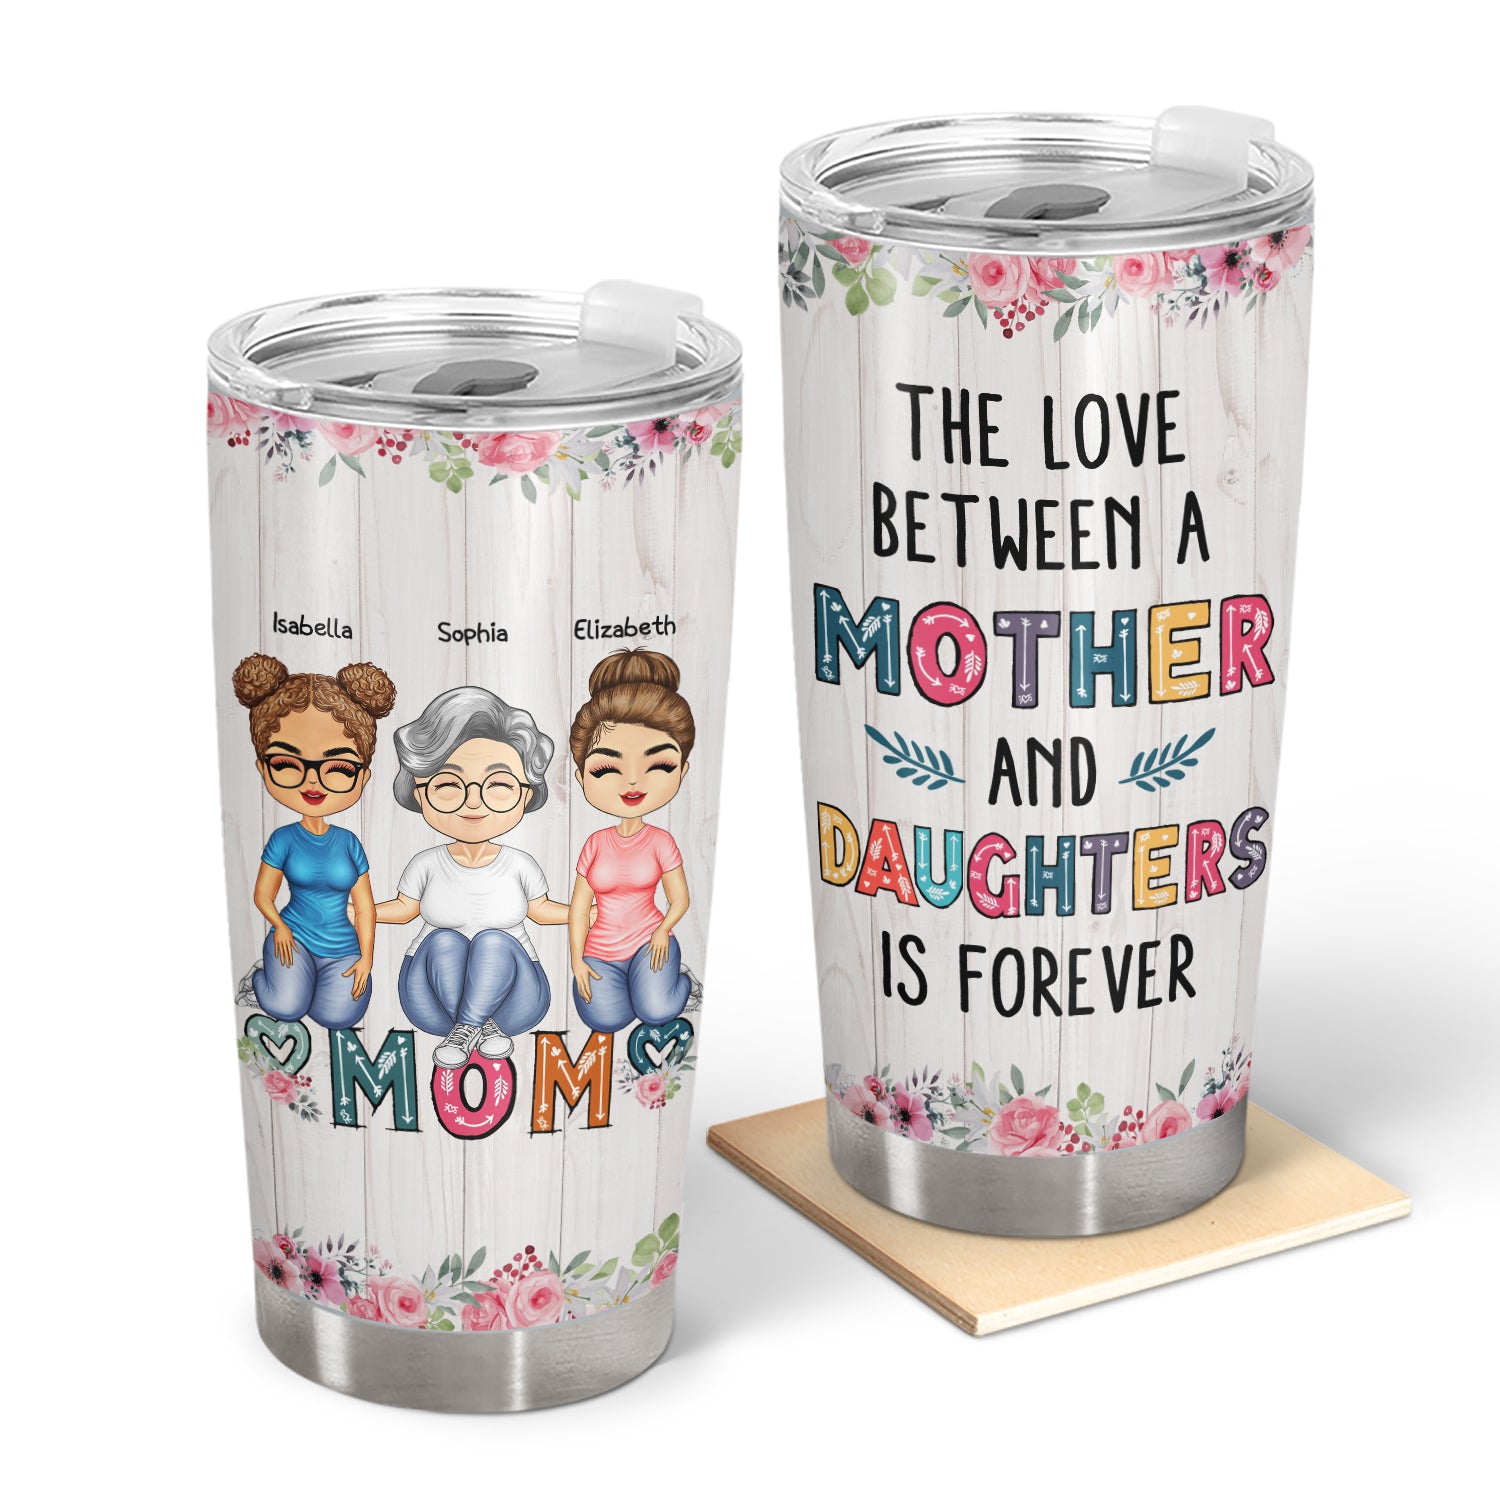 The Love Between A Mother & Daughters Sons Is Forever - Birthday, Loving Gift For Mom, Mother, Grandma, Grandmother - Personalized Custom Tumbler